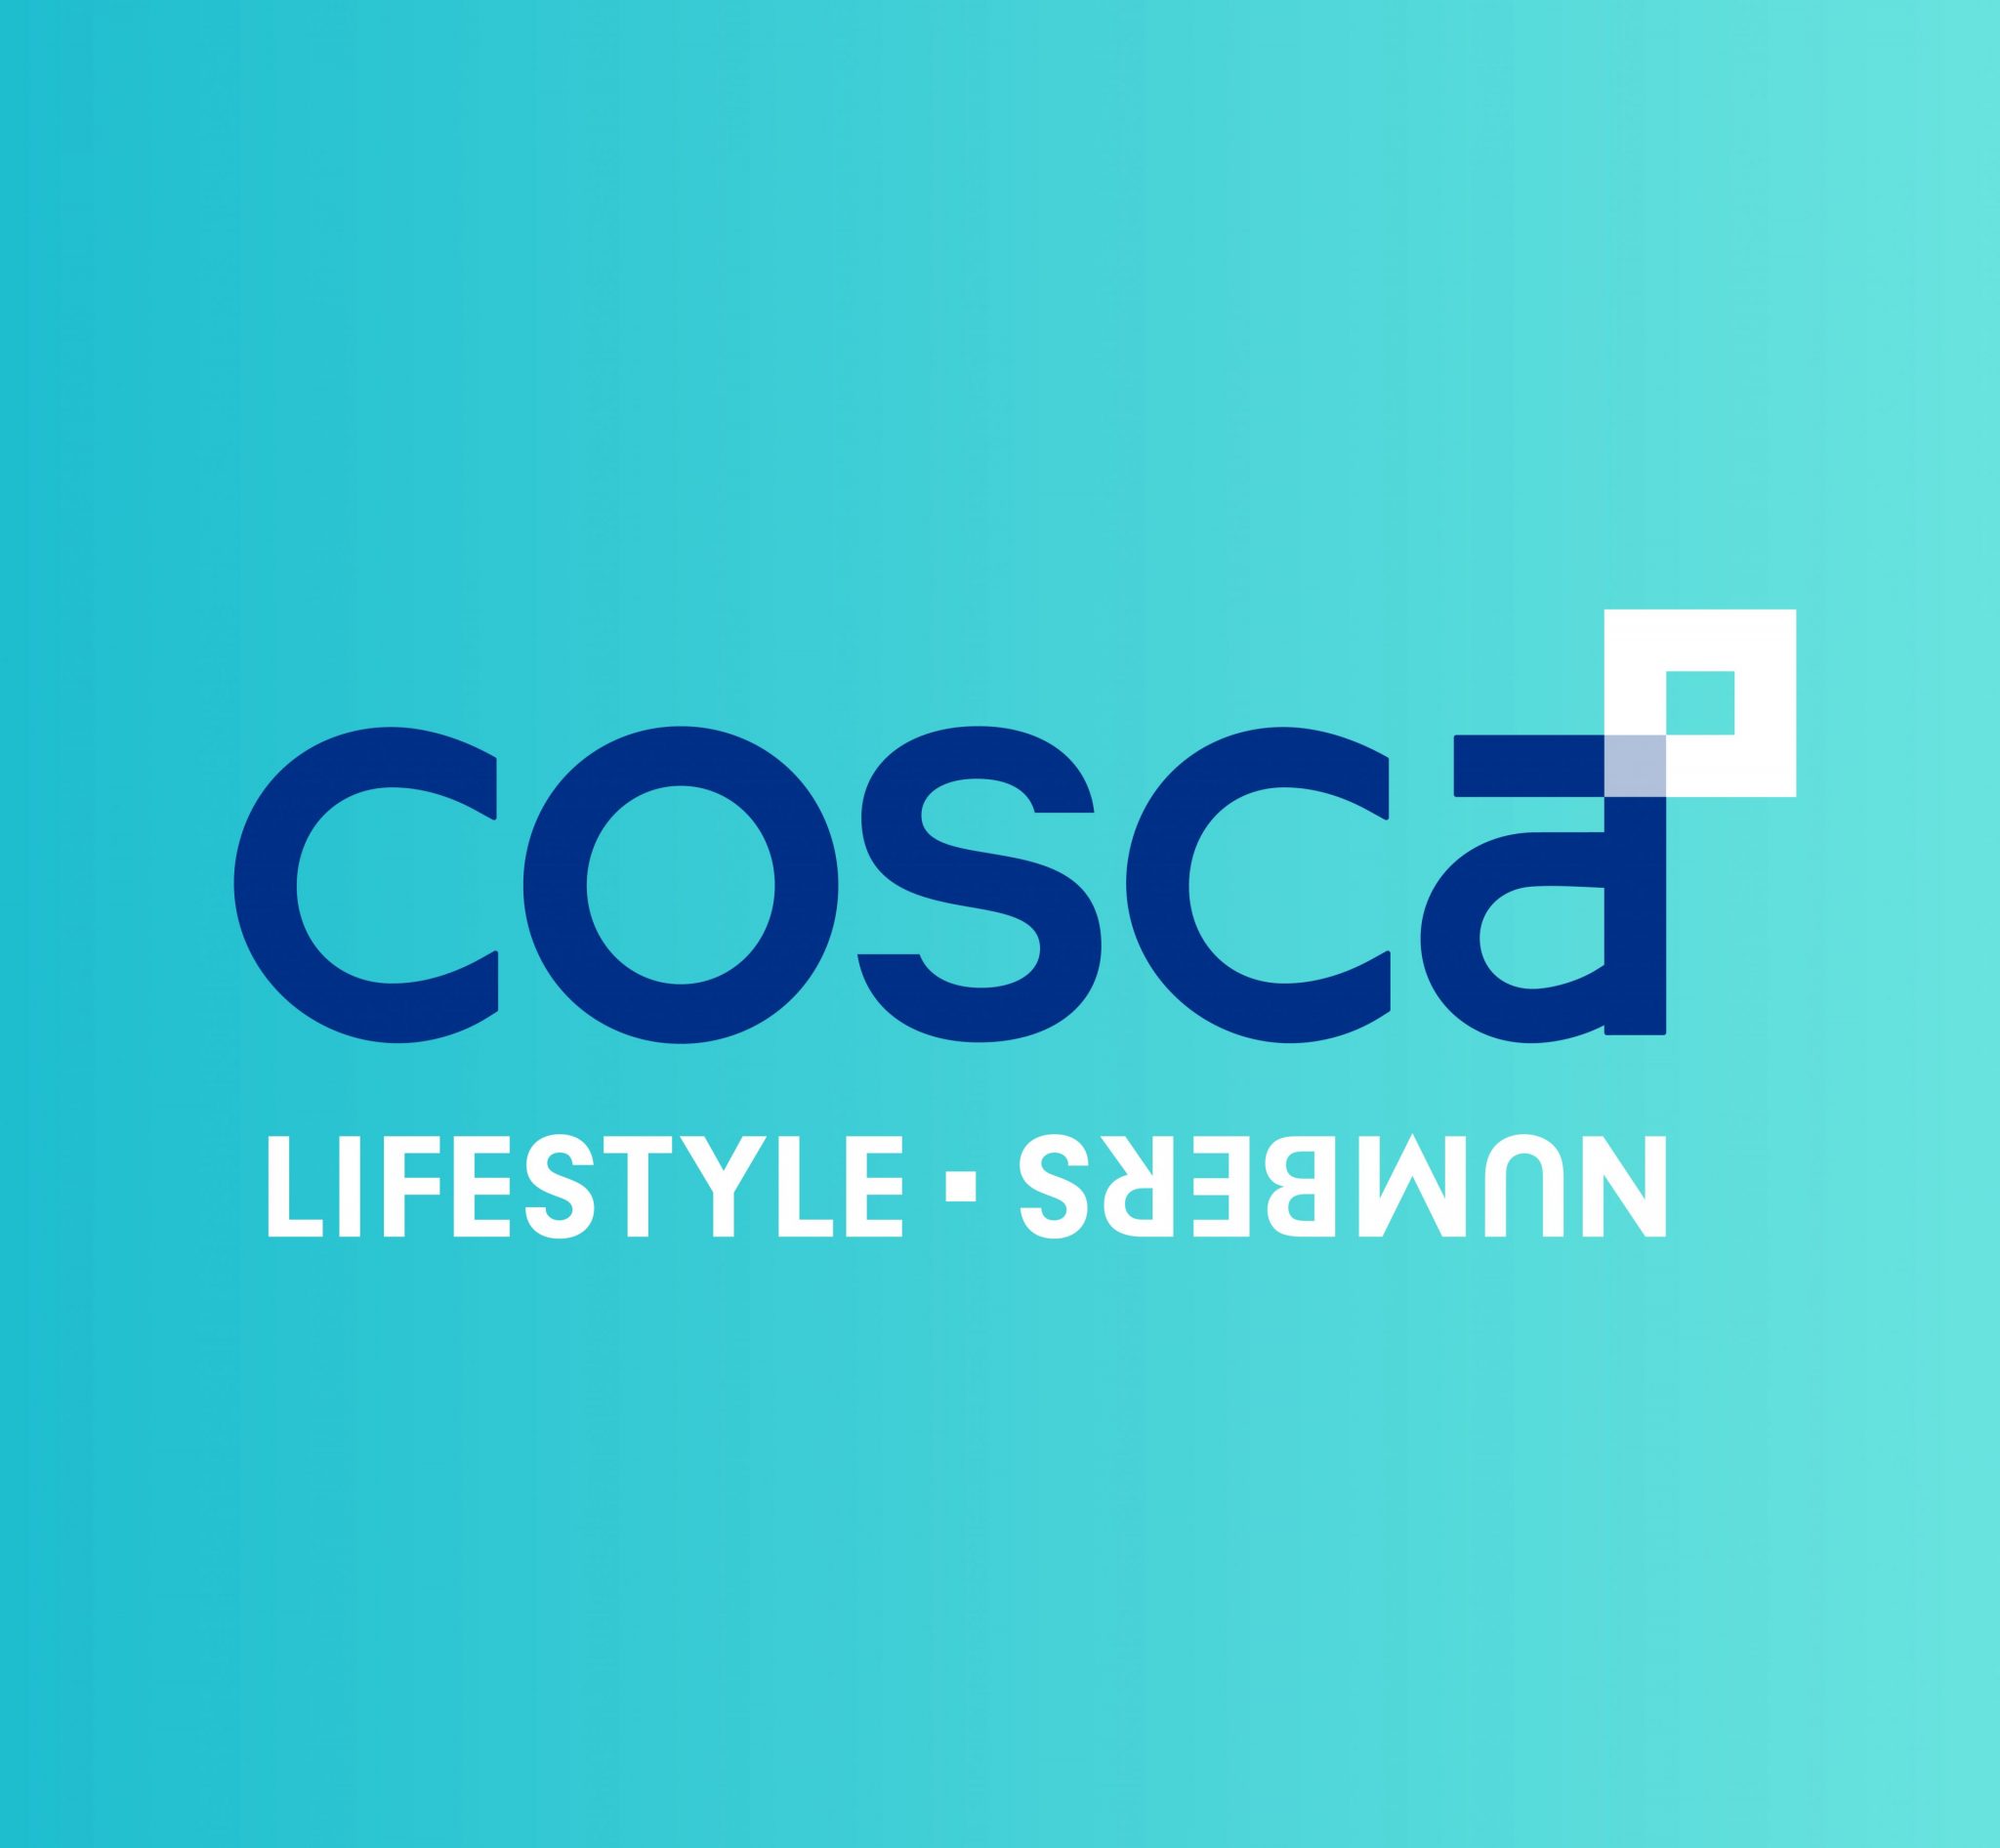 Cosca new brand identity based on brand strategy with lifestyle numbers